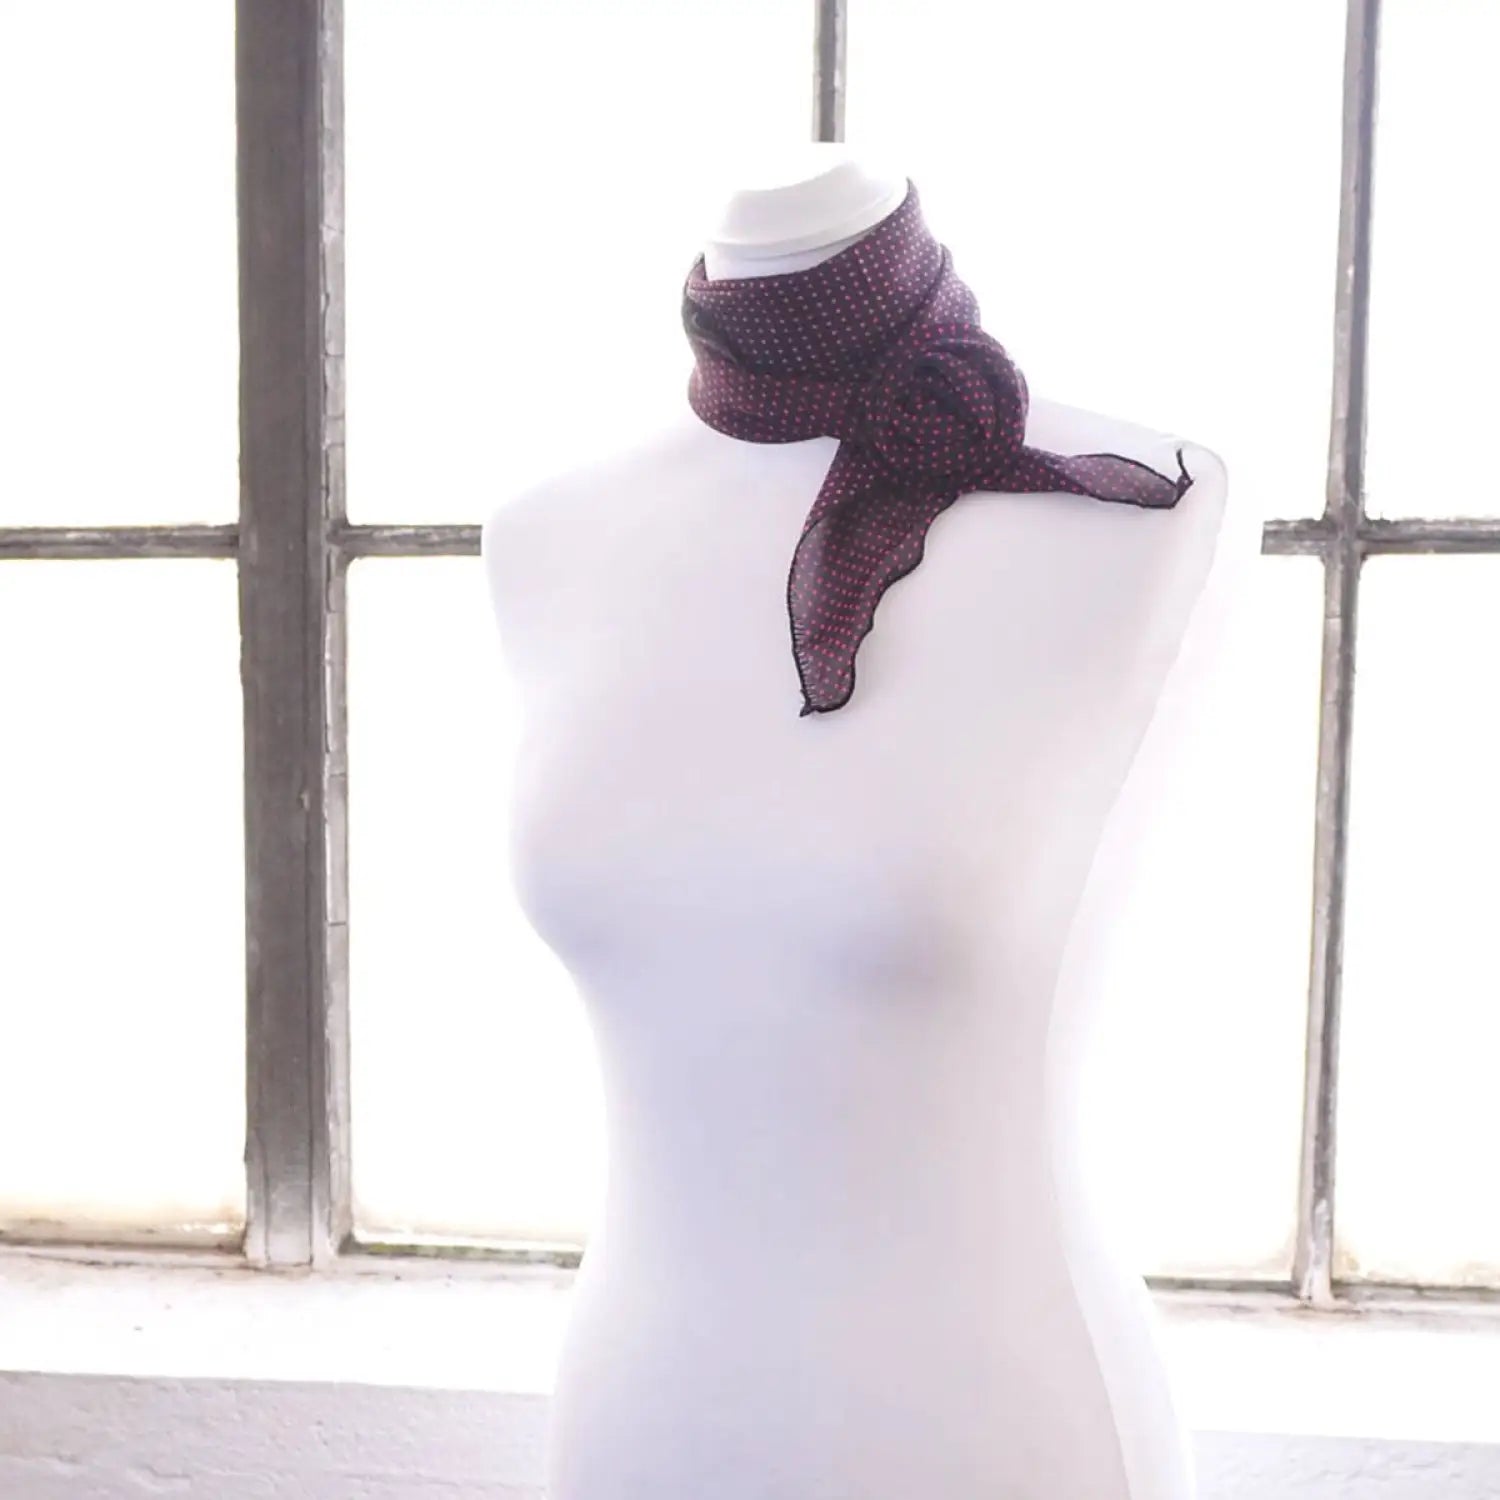 Polka dot chiffon scarf with purple and black polka print scarf on mannequin